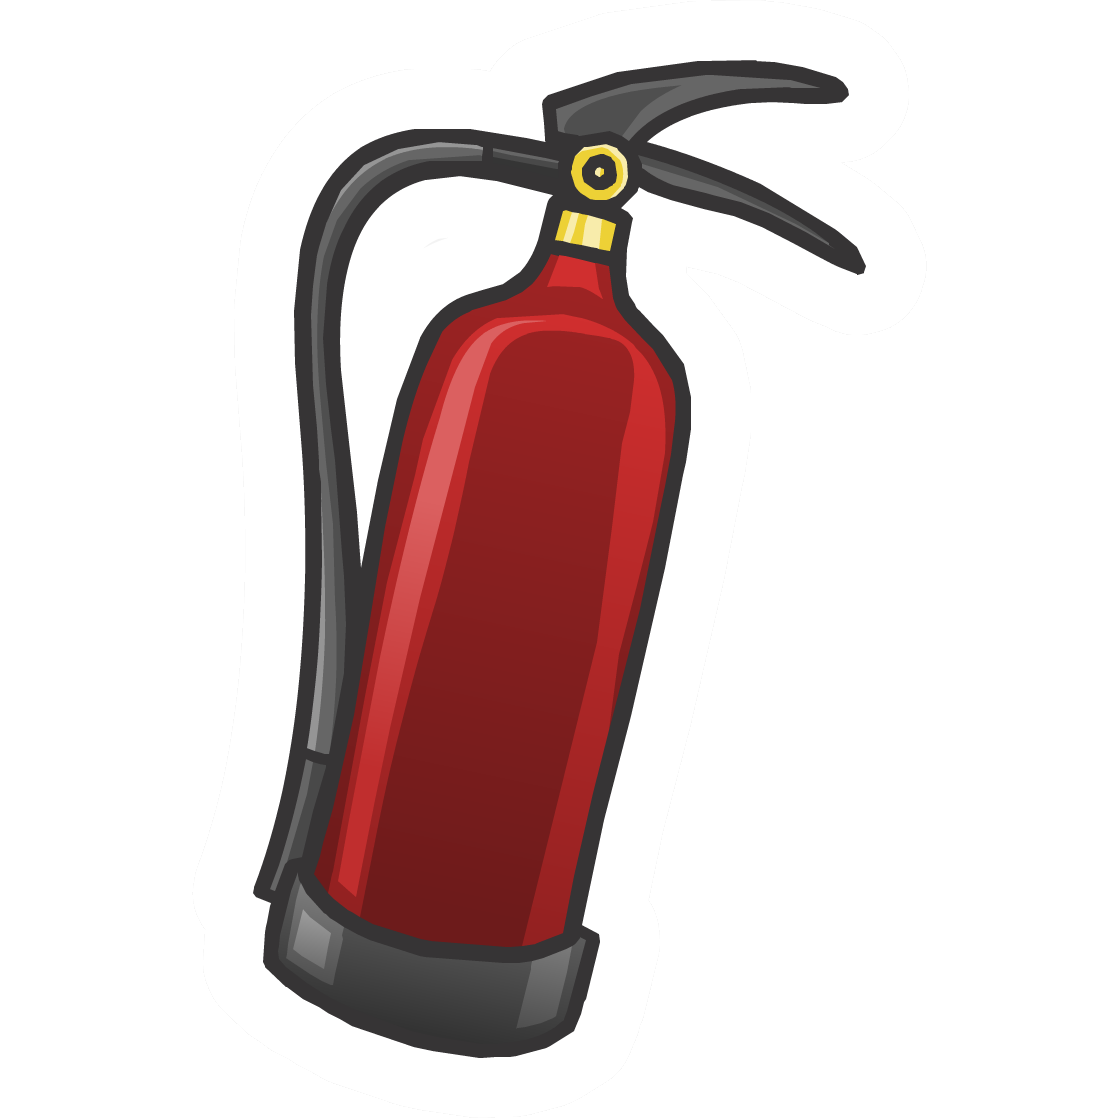 Fire extinguisher cartoon panda. Flames clipart red flame